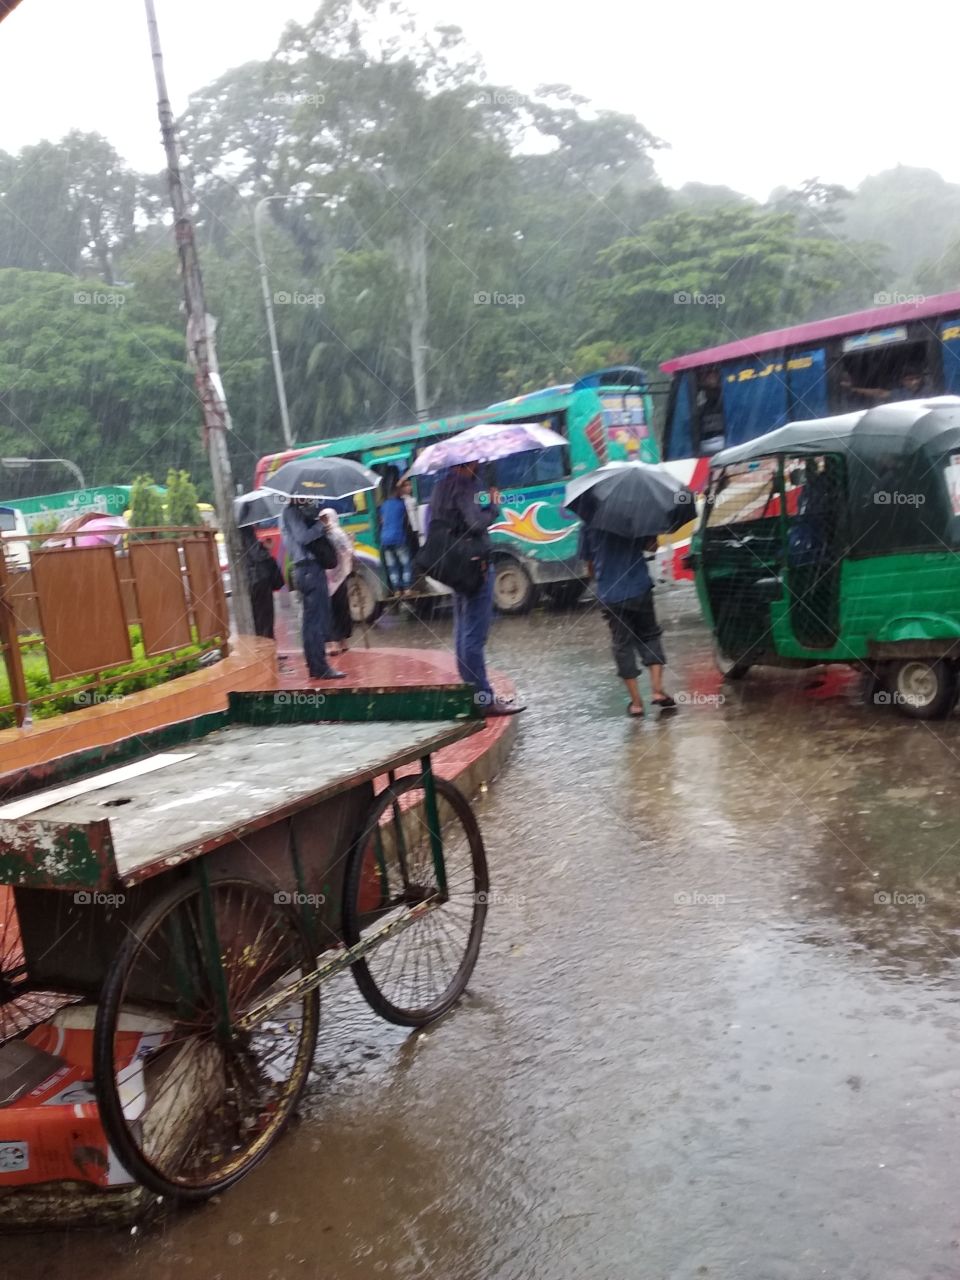 Outside the rain, people are running in search of livelihood